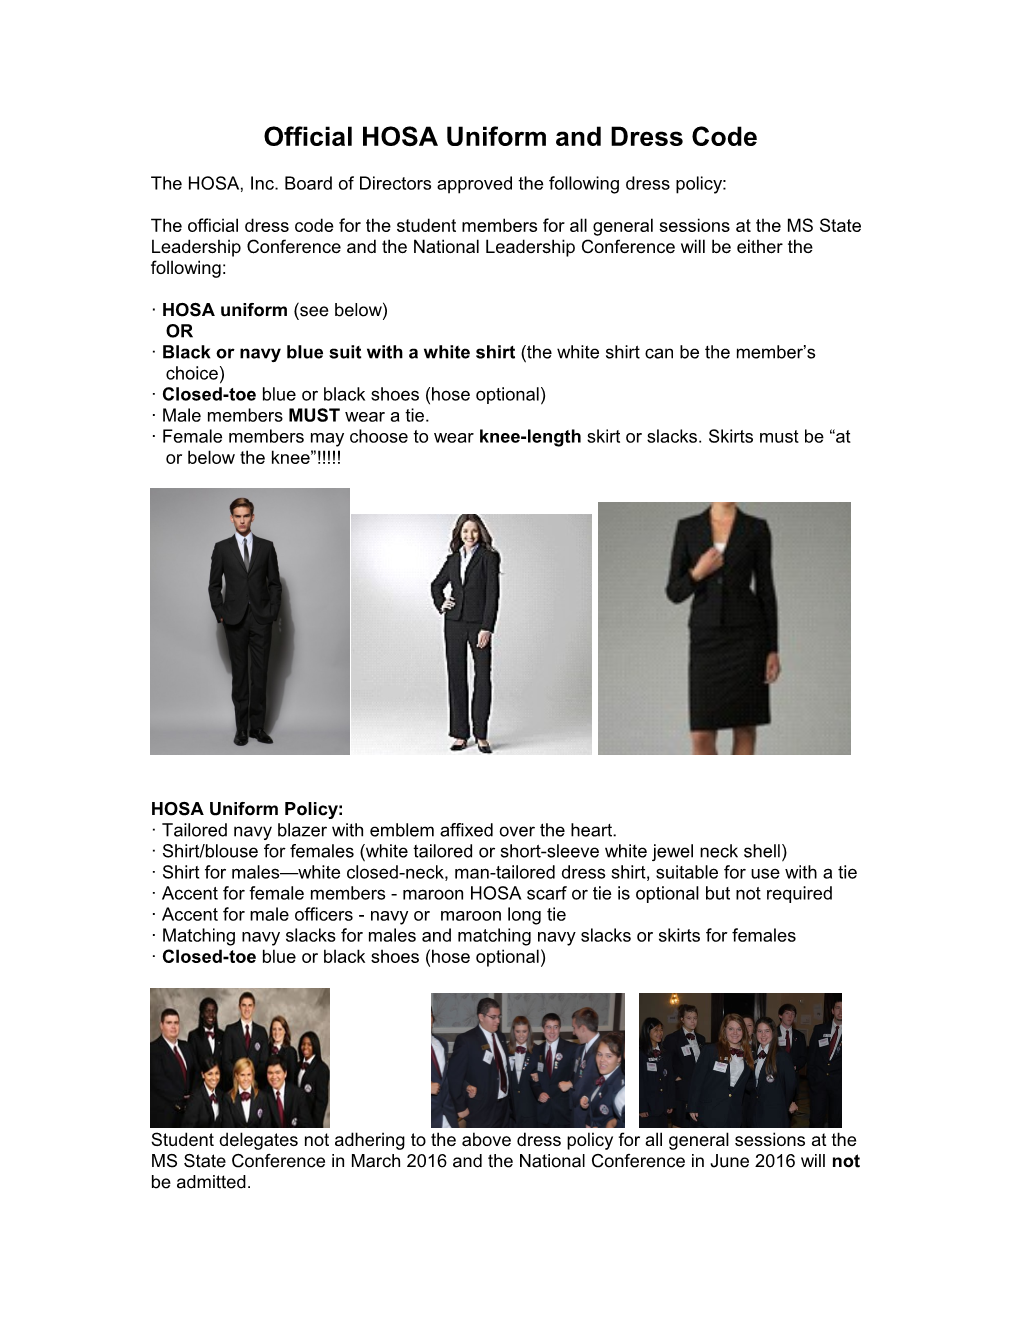 An Official HOSA Uniform Is Required of Voting Delegates and National Officers